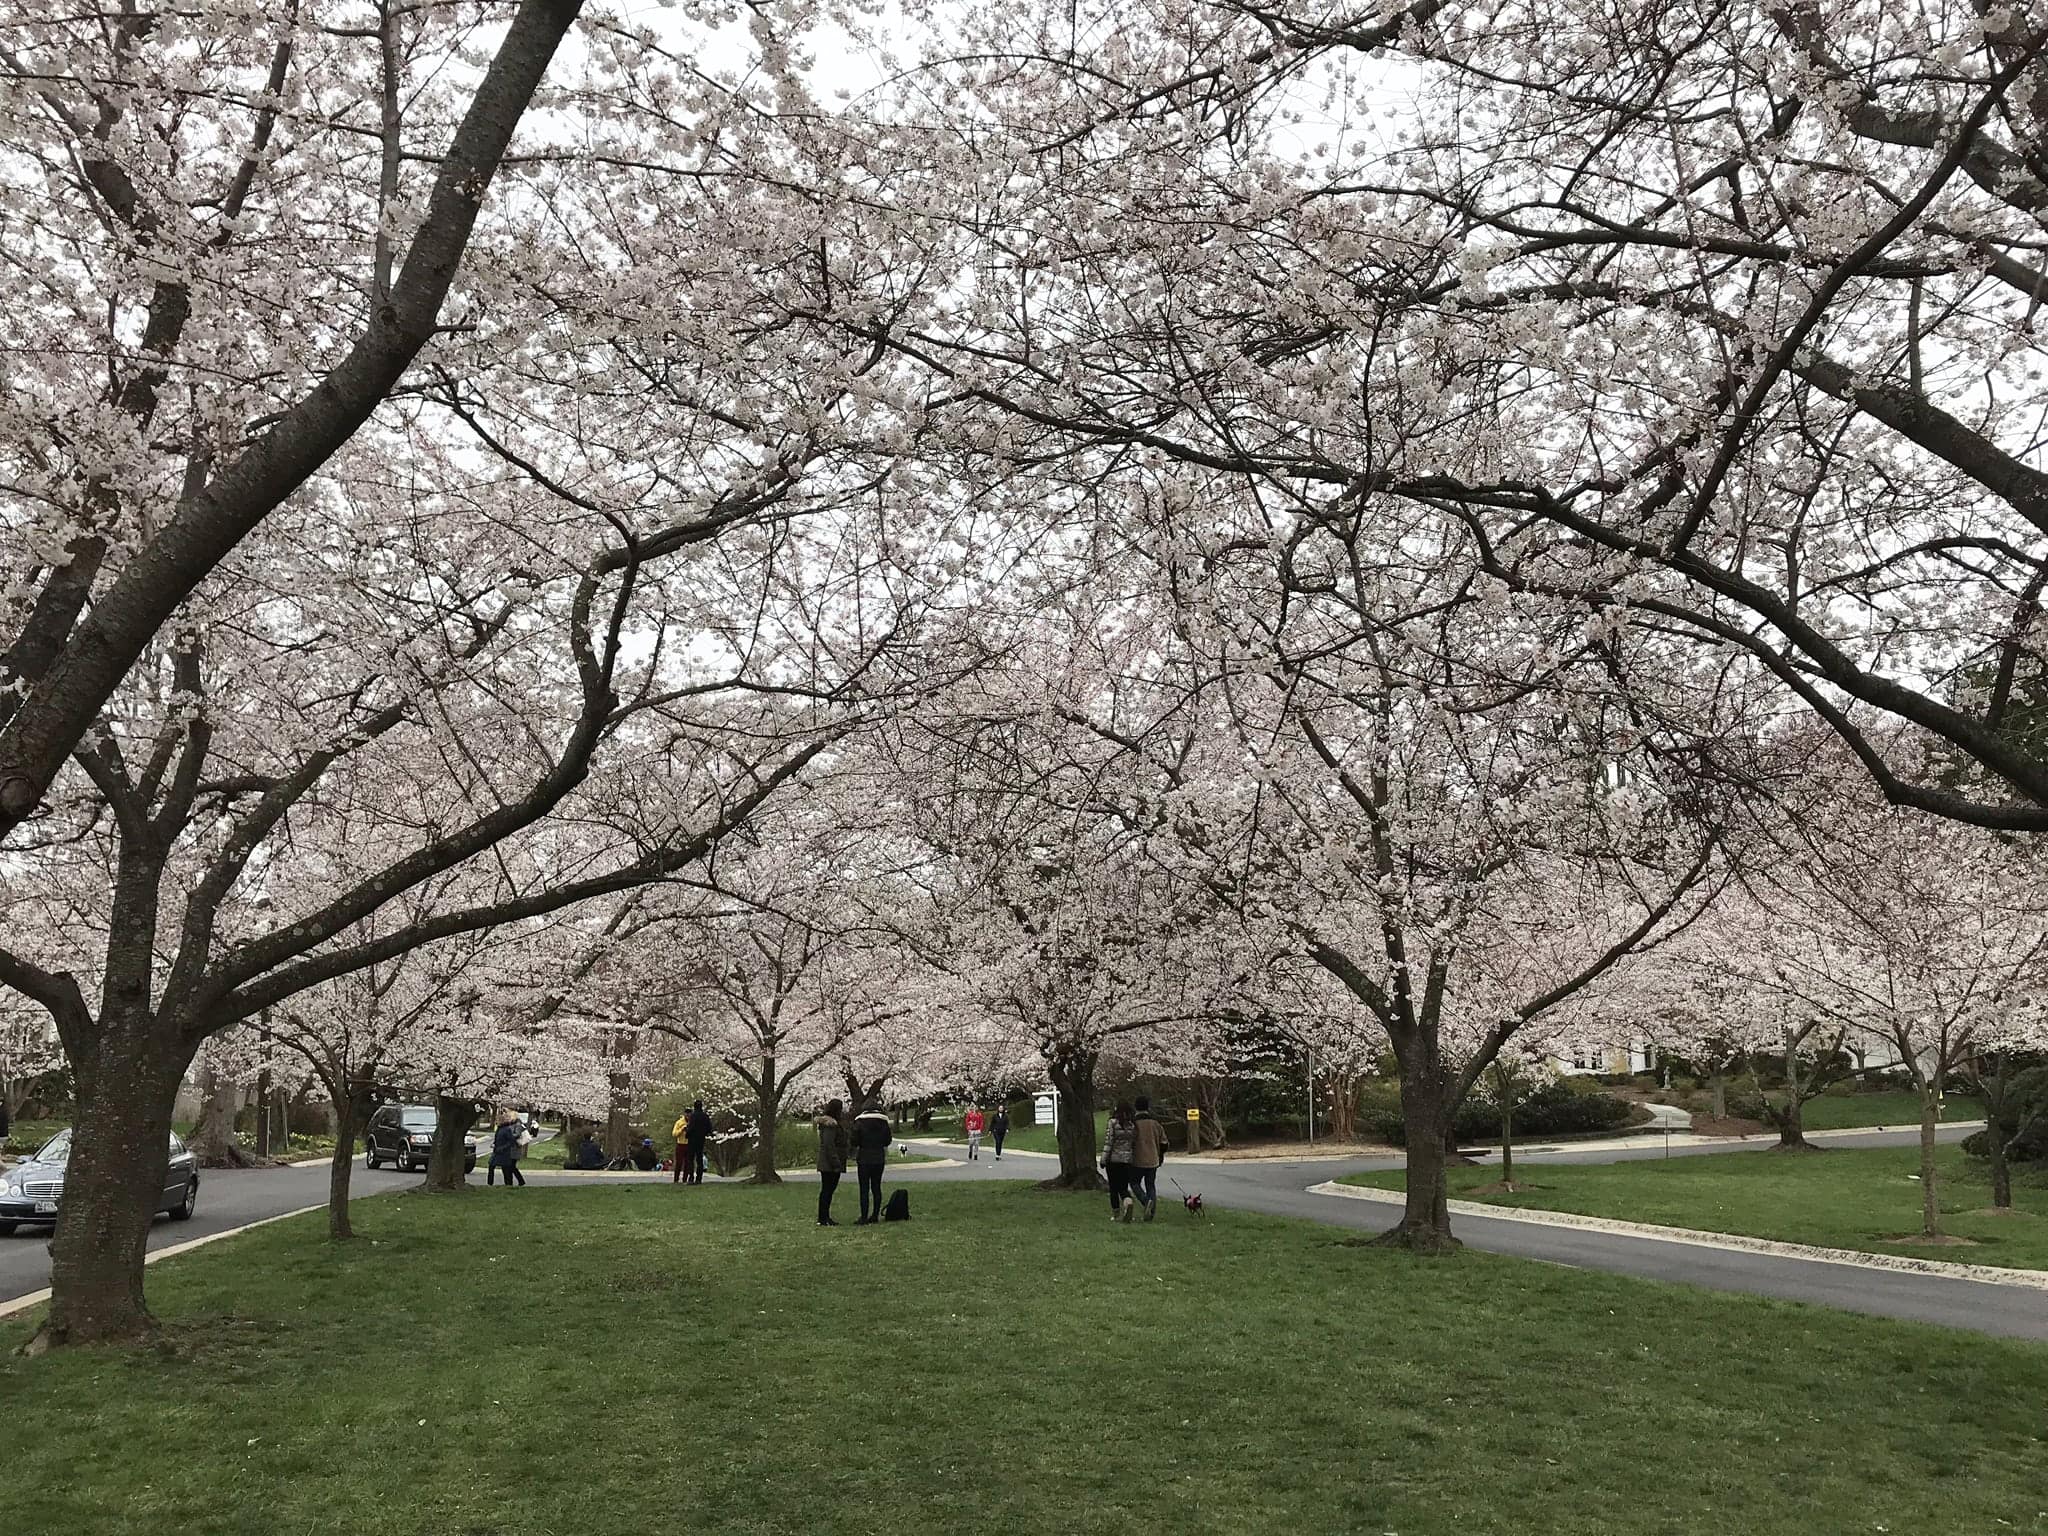 What You Need to Know About Cherry Blossom Viewing in Kenwood, MD